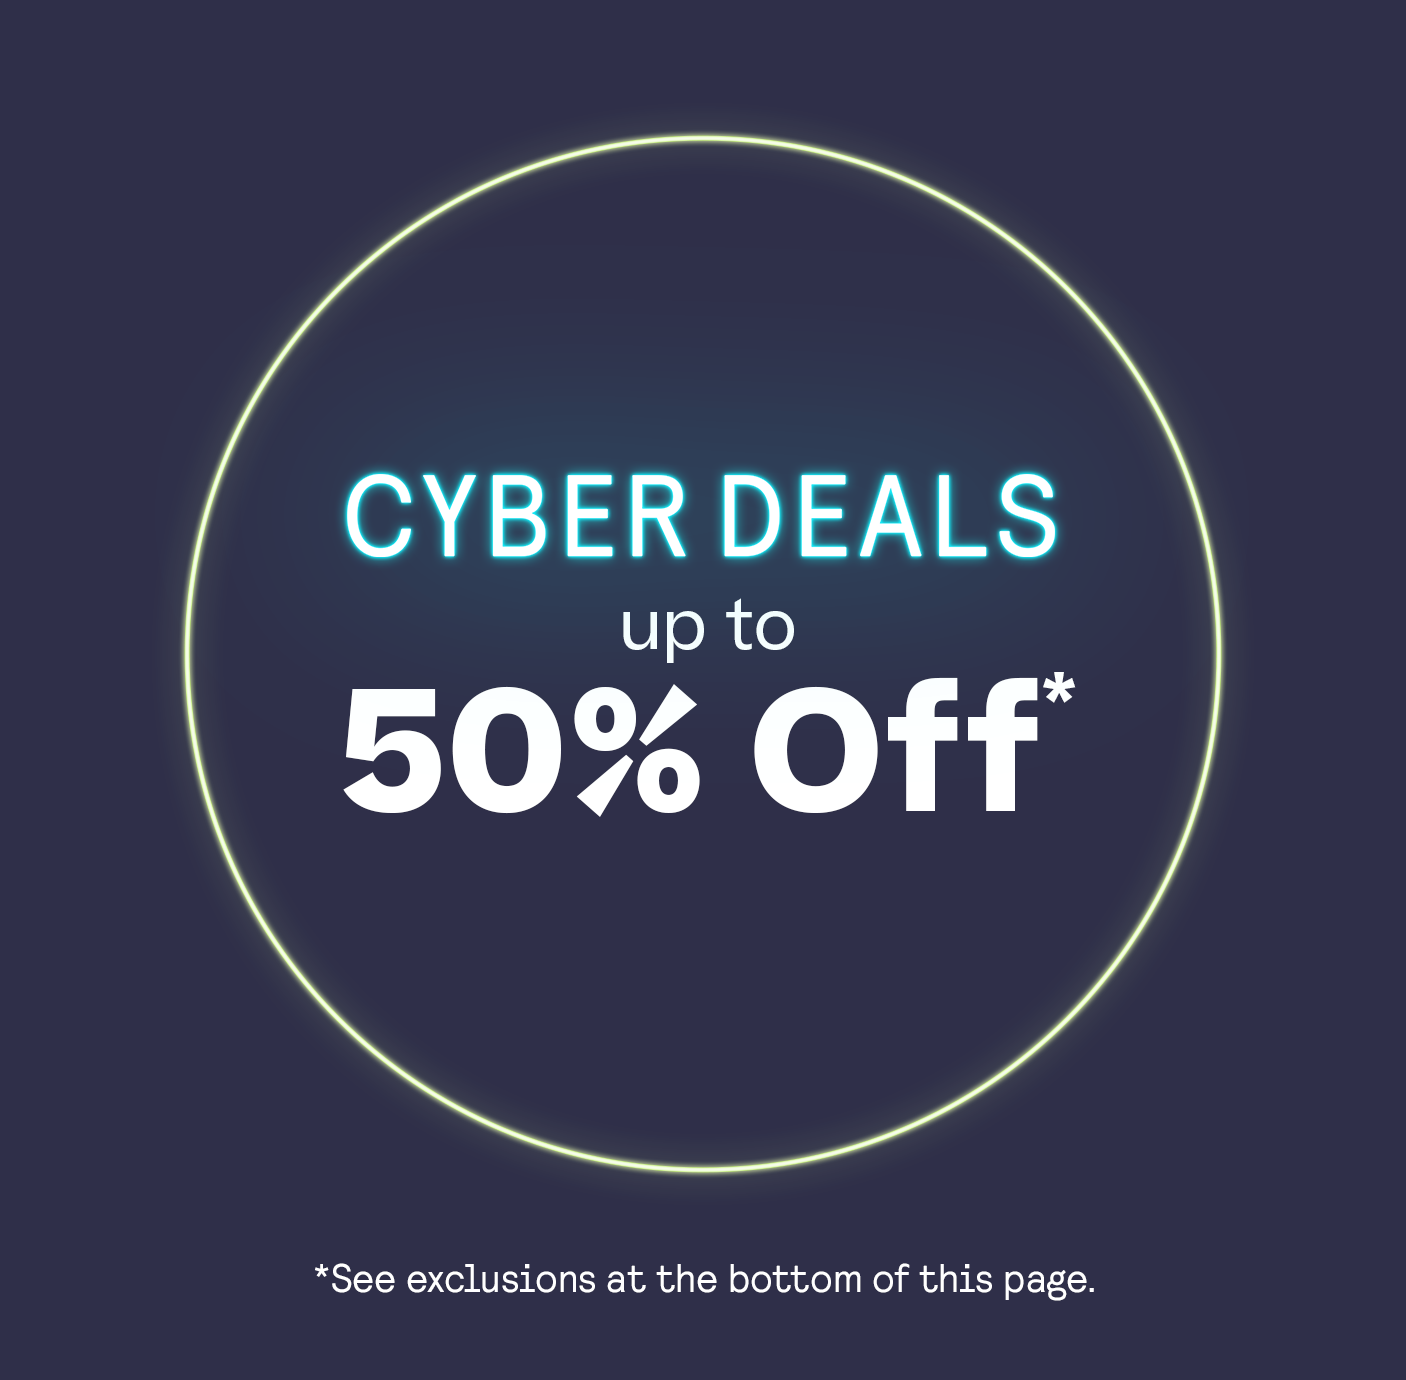 Cyber Deal Up to 50% Off* exclusions in footer